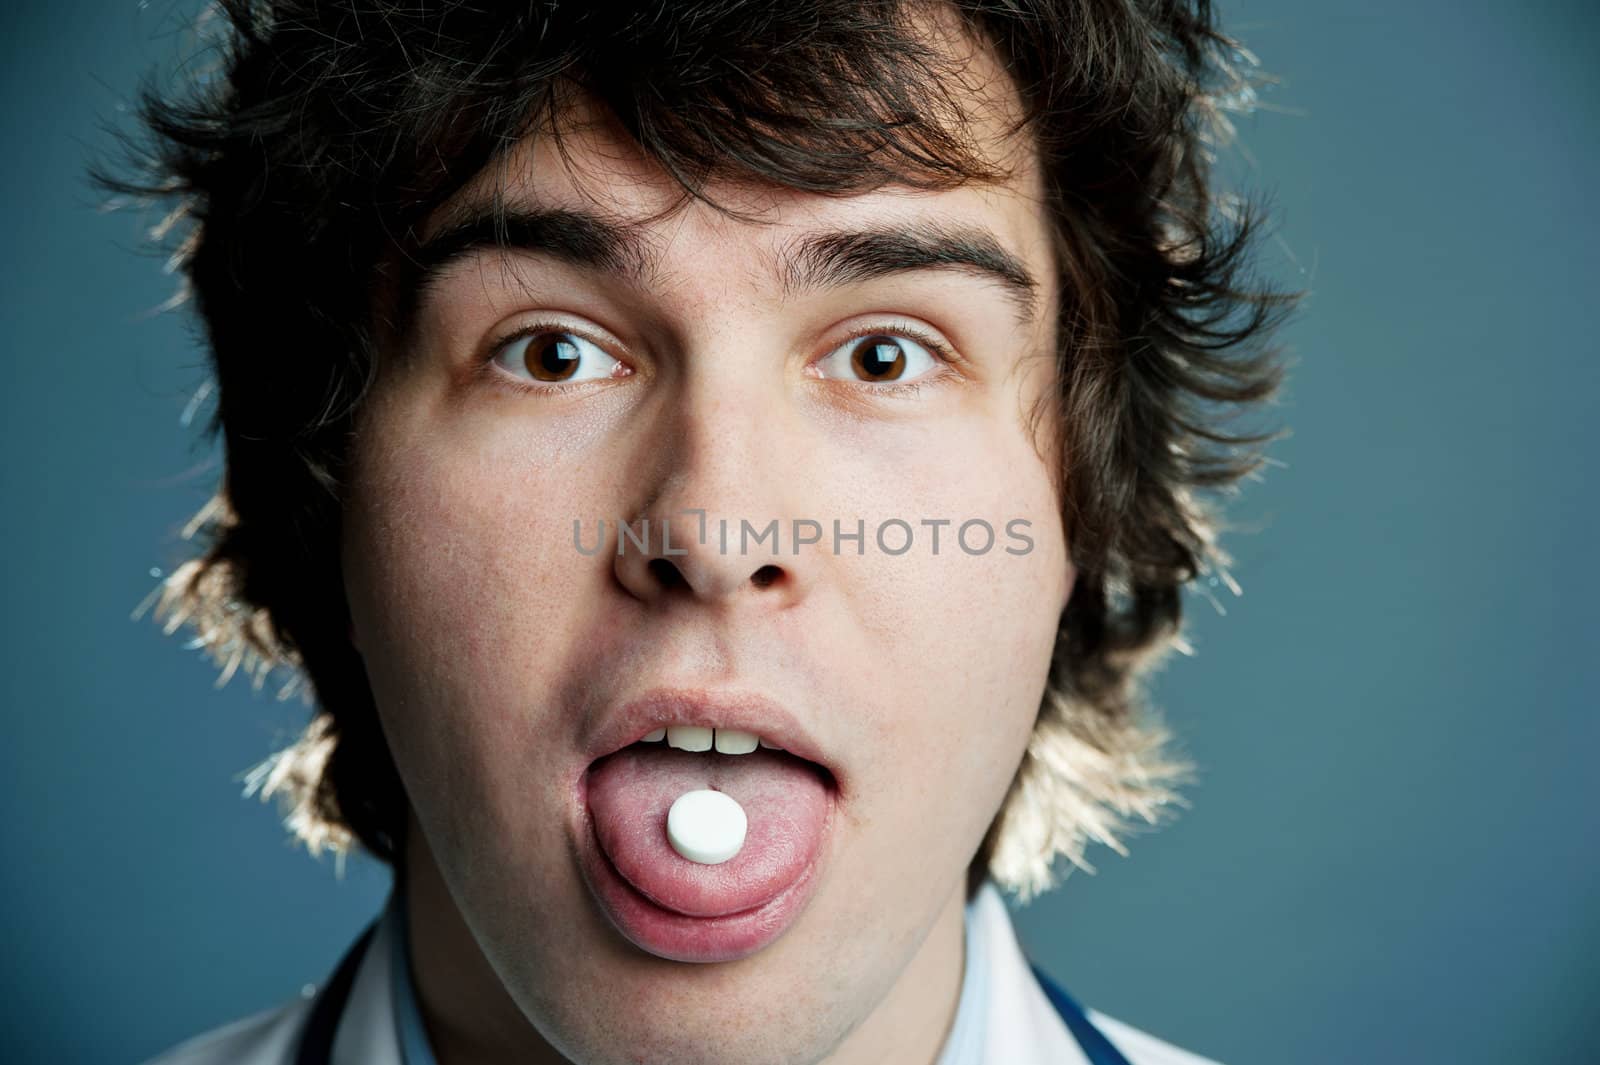 An image of a tablet in the mouth of a man